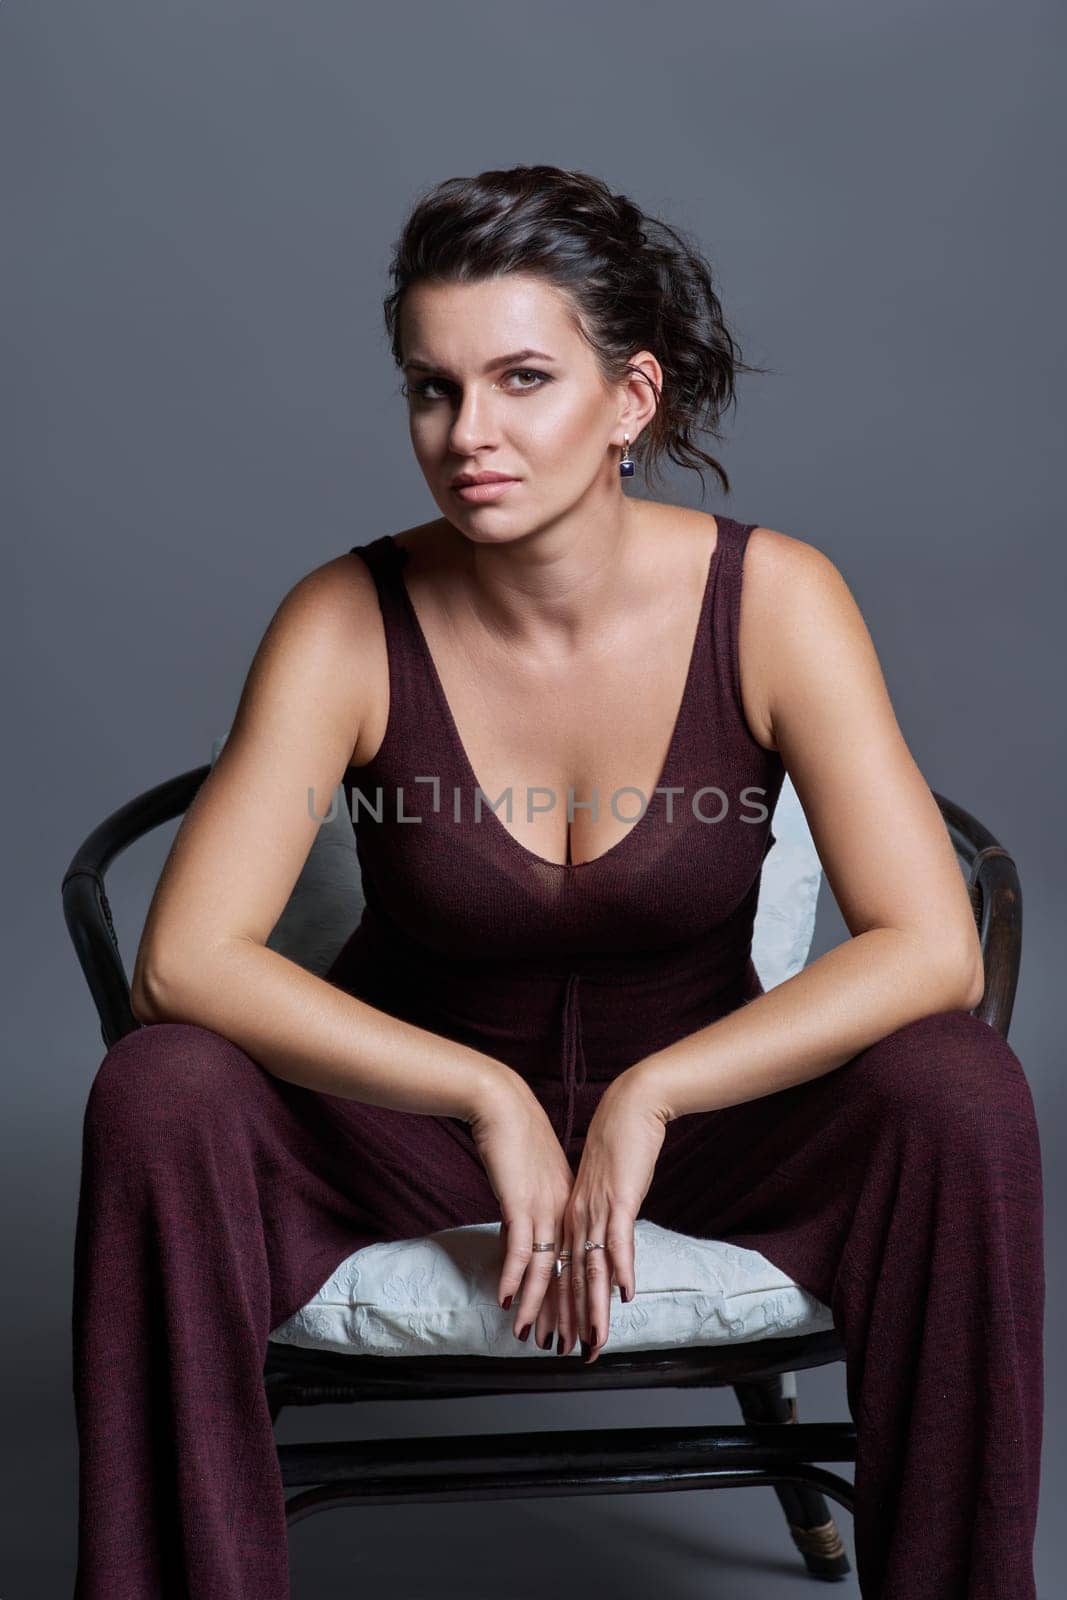 Fashionable sensual attractive young woman posing sitting in chair on dark gray studio background. Beauty, fashion, style concept